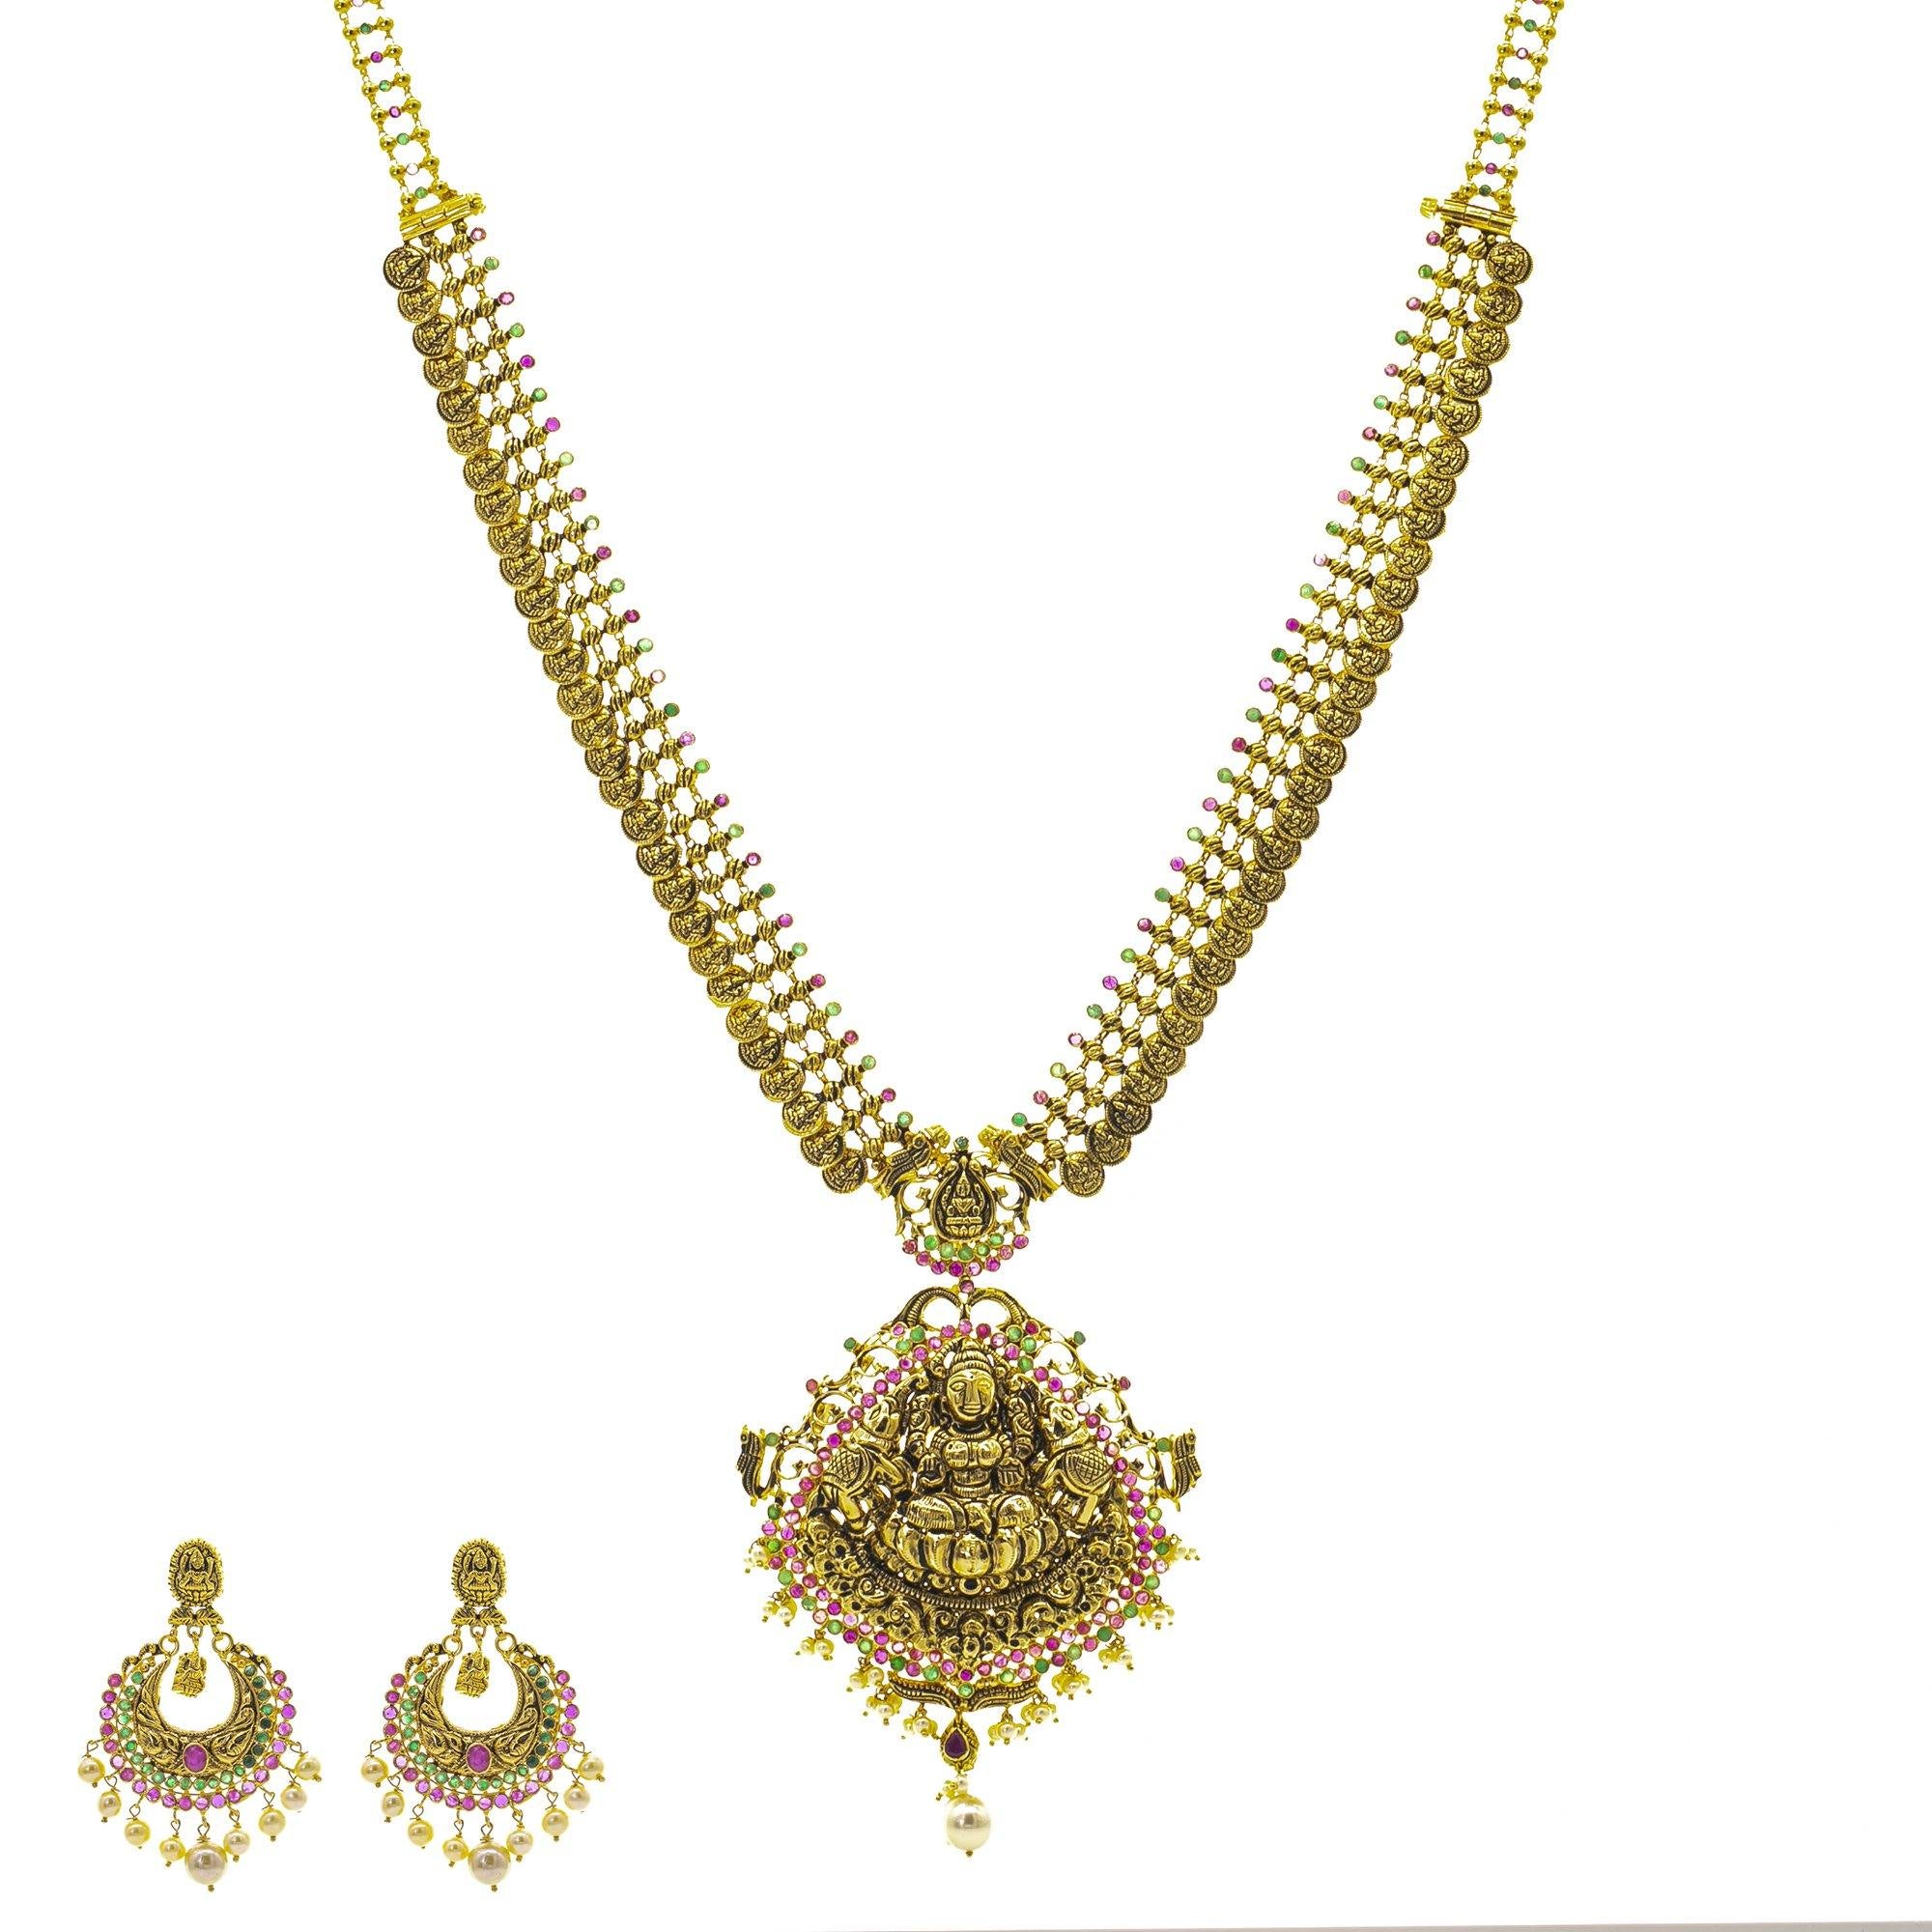 One Gram Gold Necklace Designs - Page 7 of 9 - South India Jewels